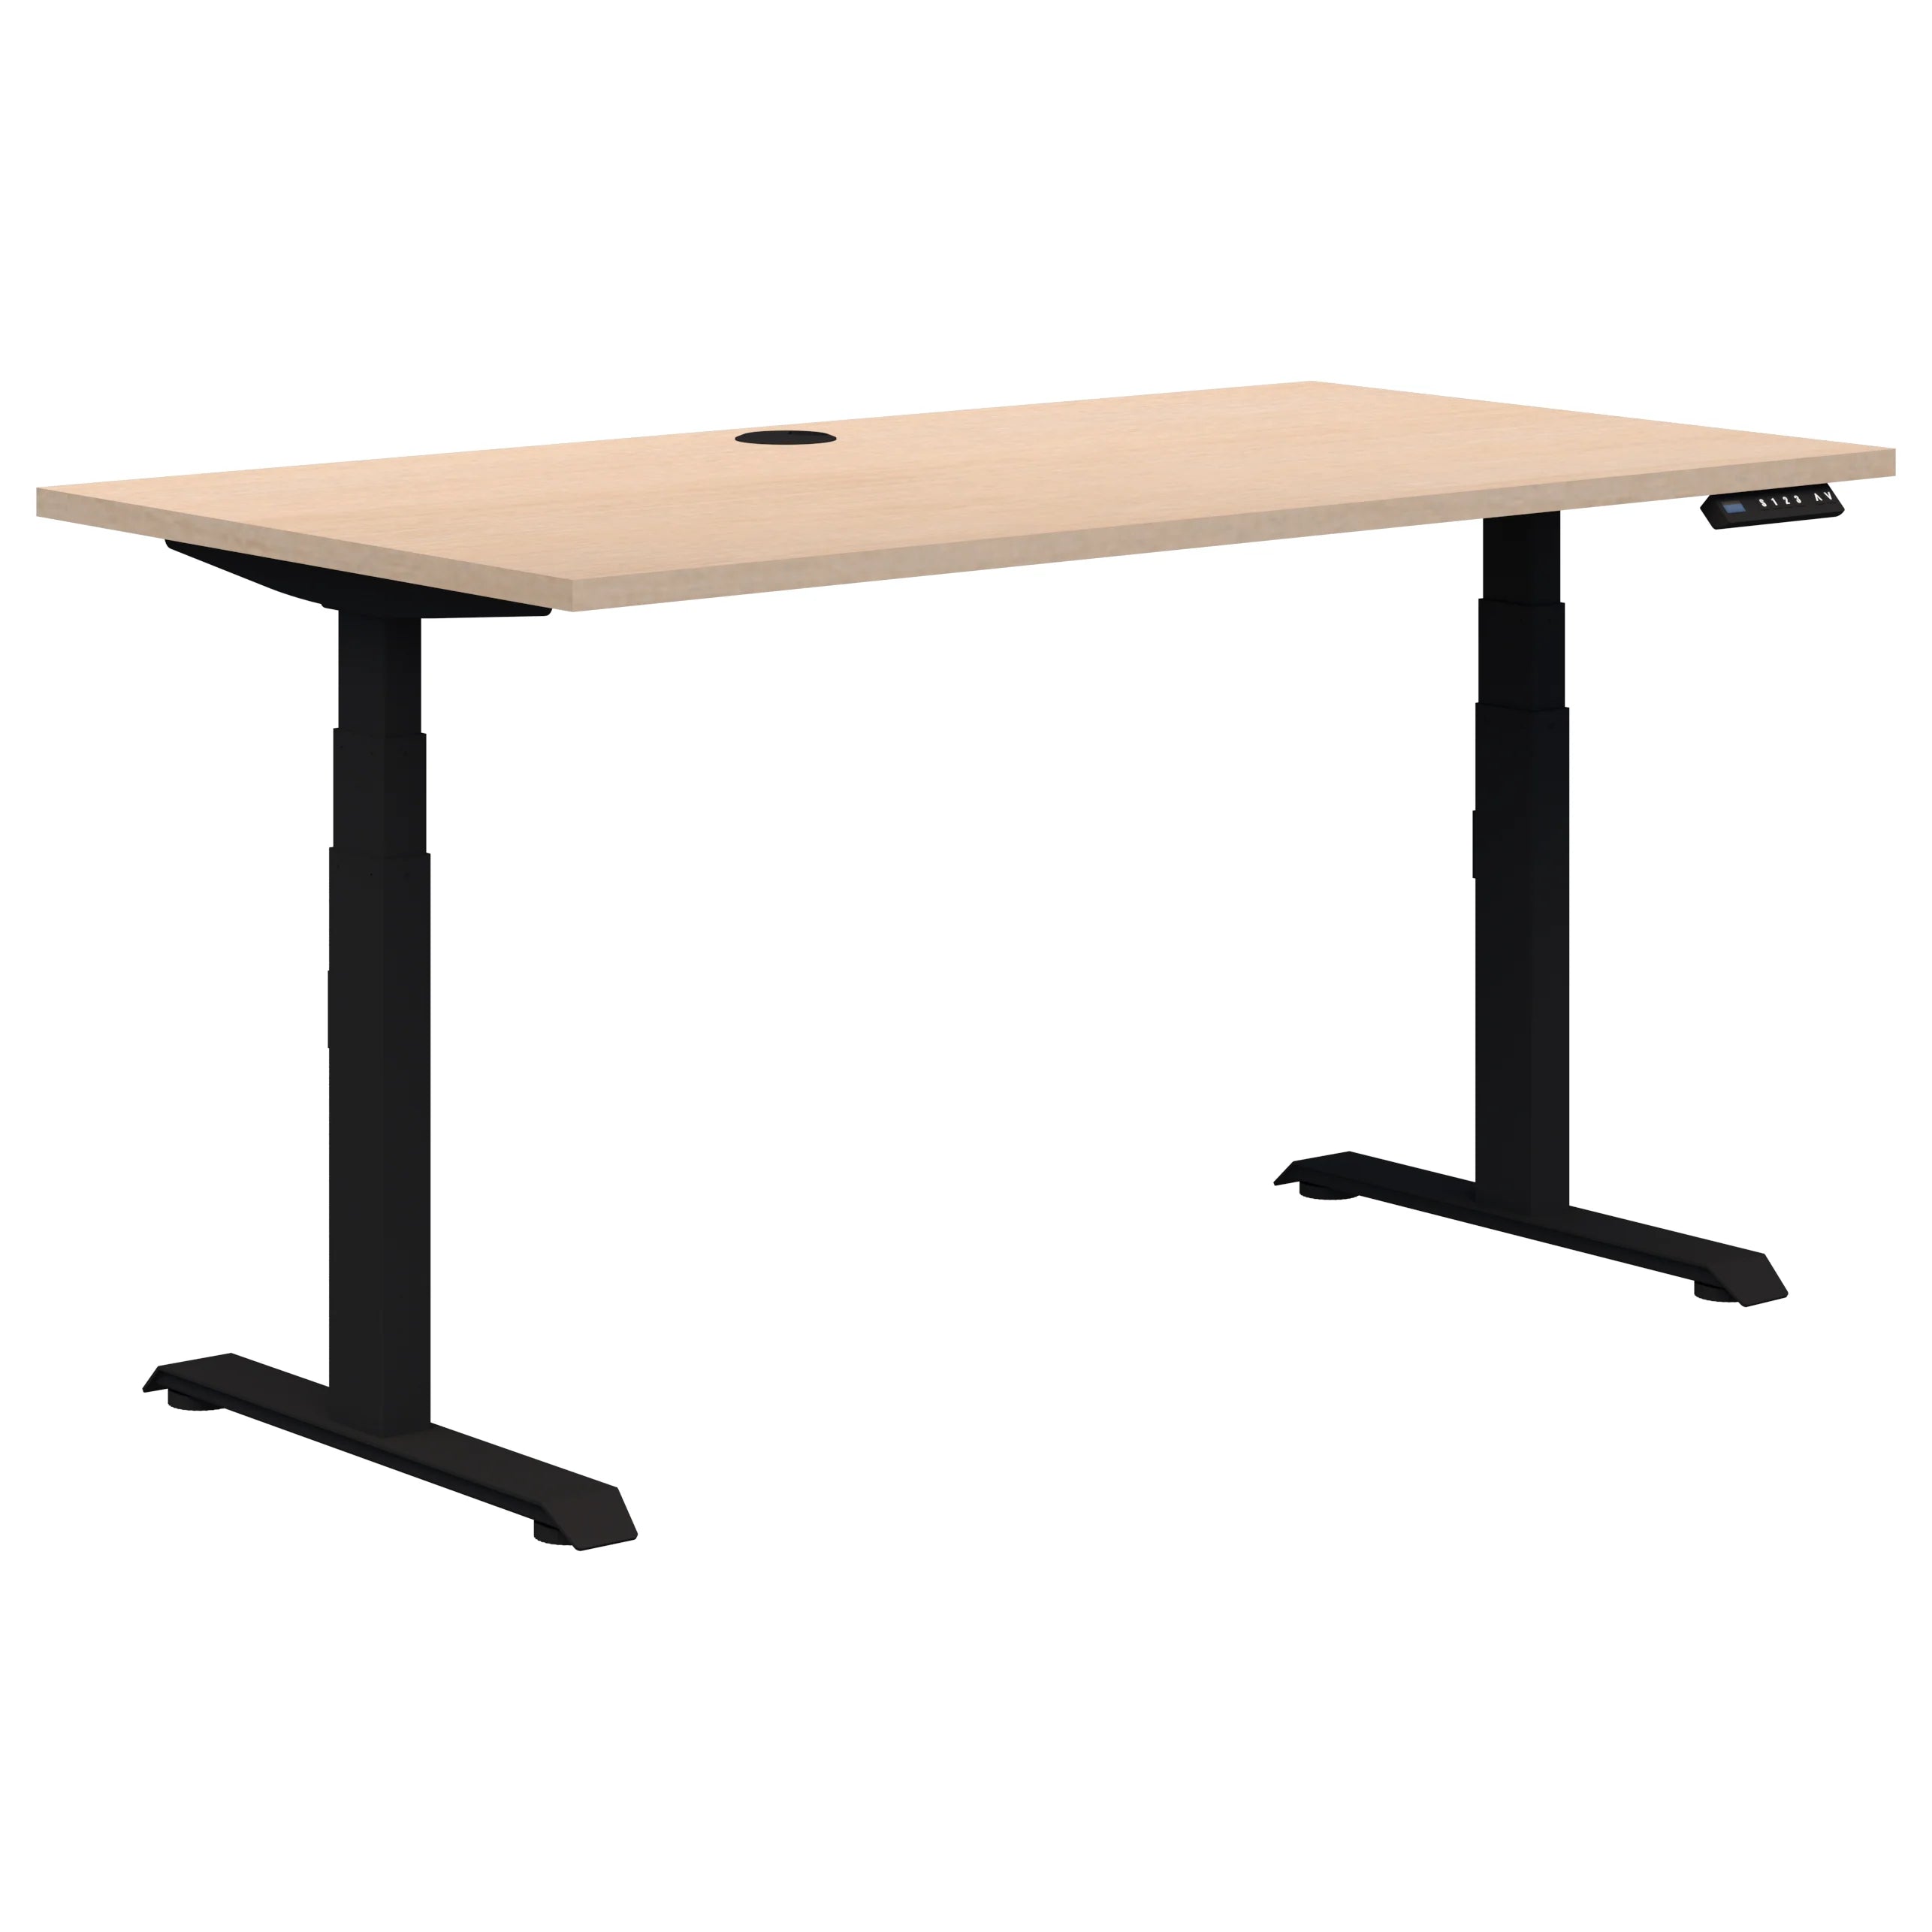 Summit electric height adjustable office desk with black frame and refined oak top.